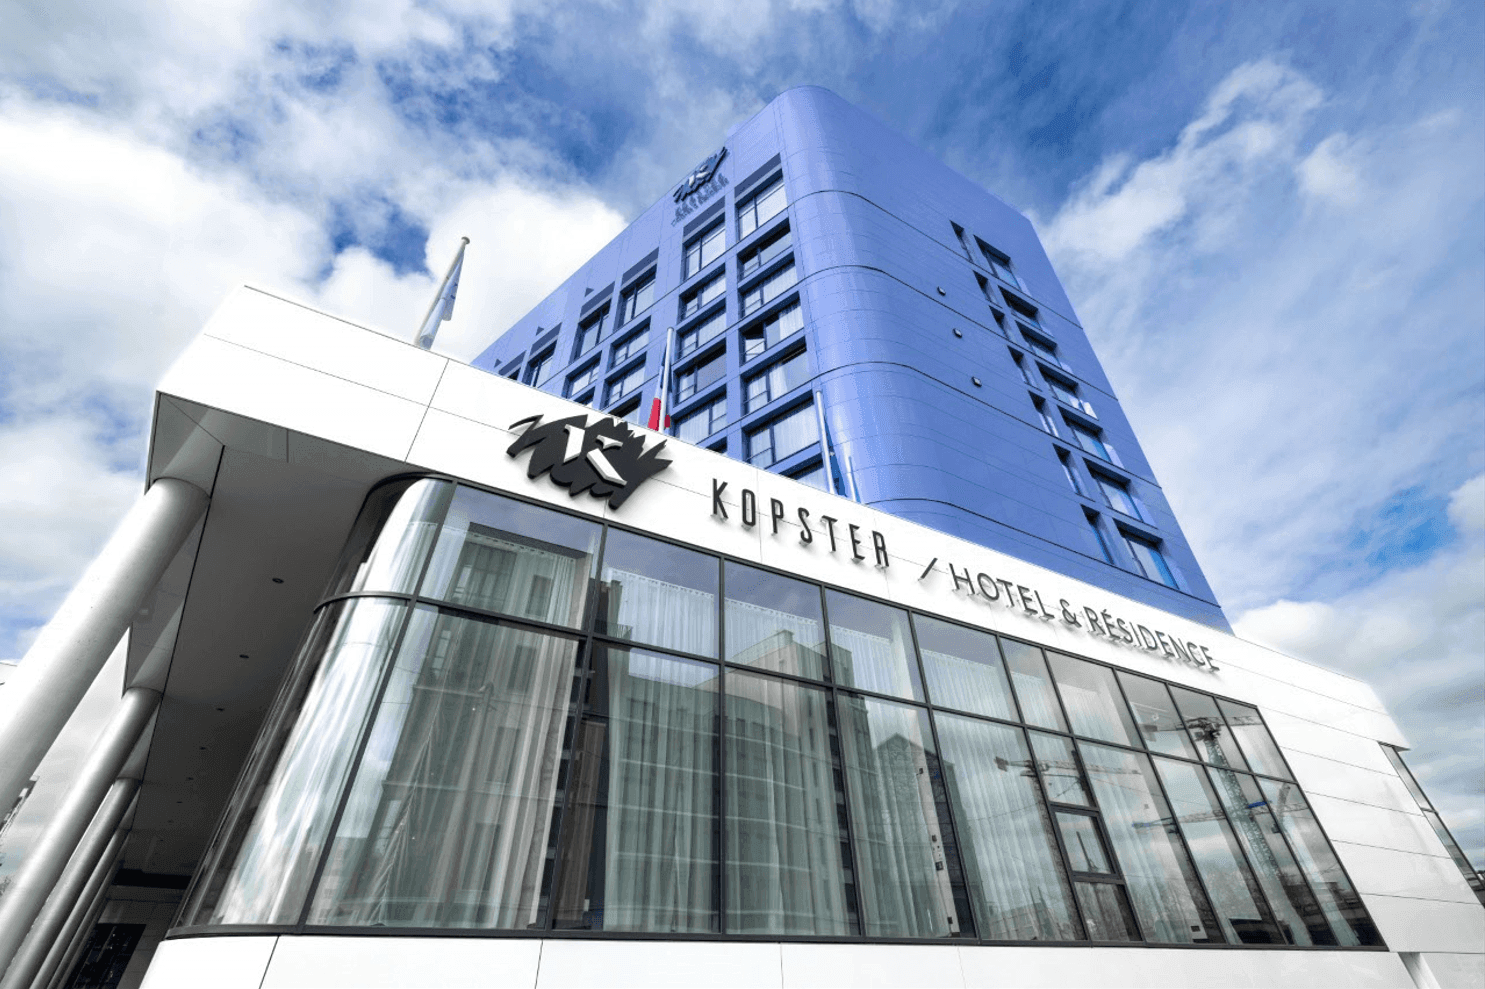 Low angle view of the hotel at Kopster Hotel Paris Ouest Colombes